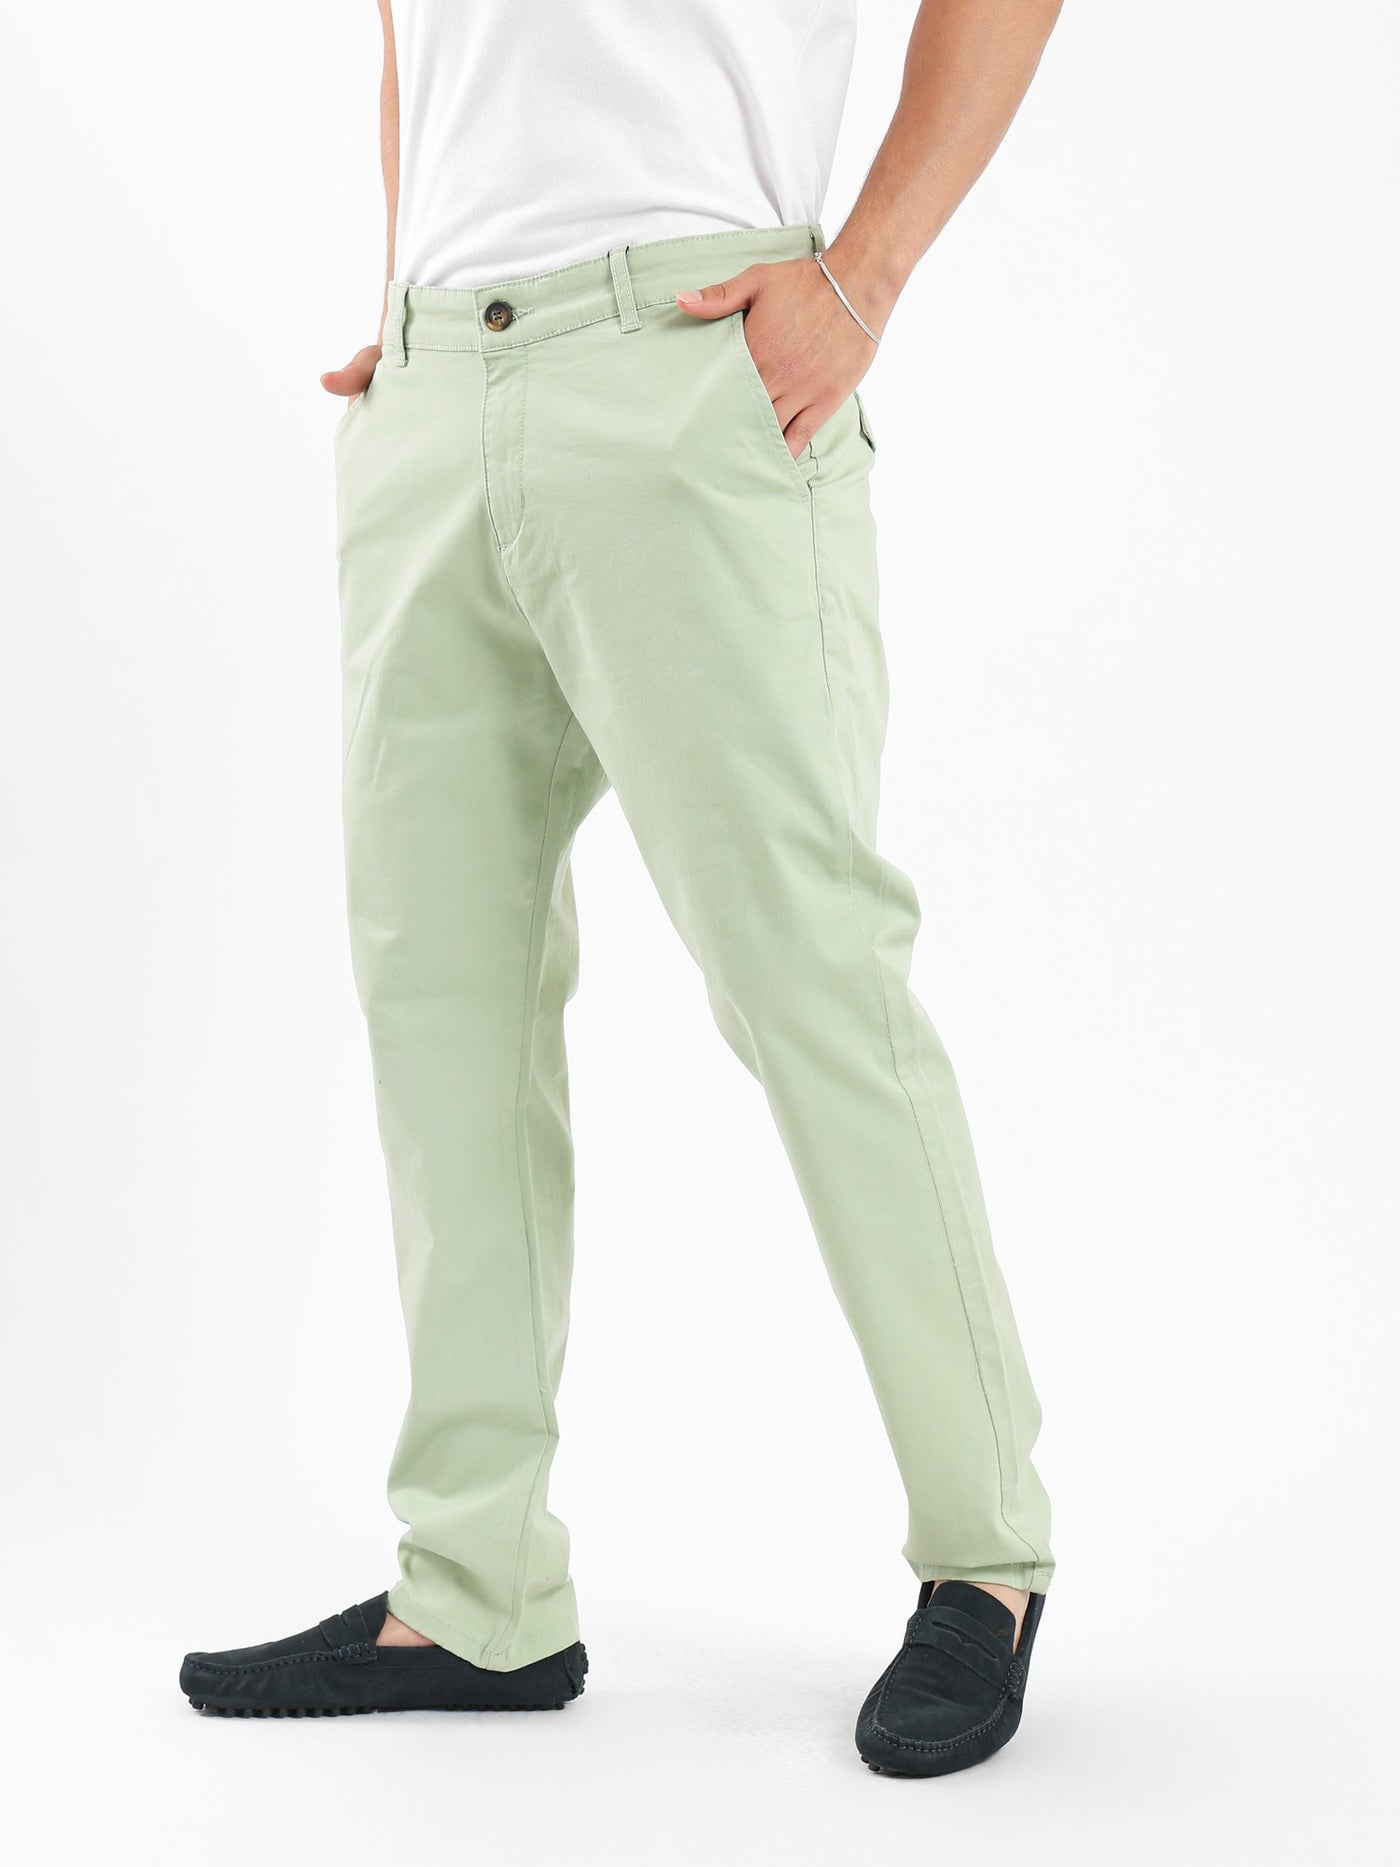 Pants - Solid - With Pockets